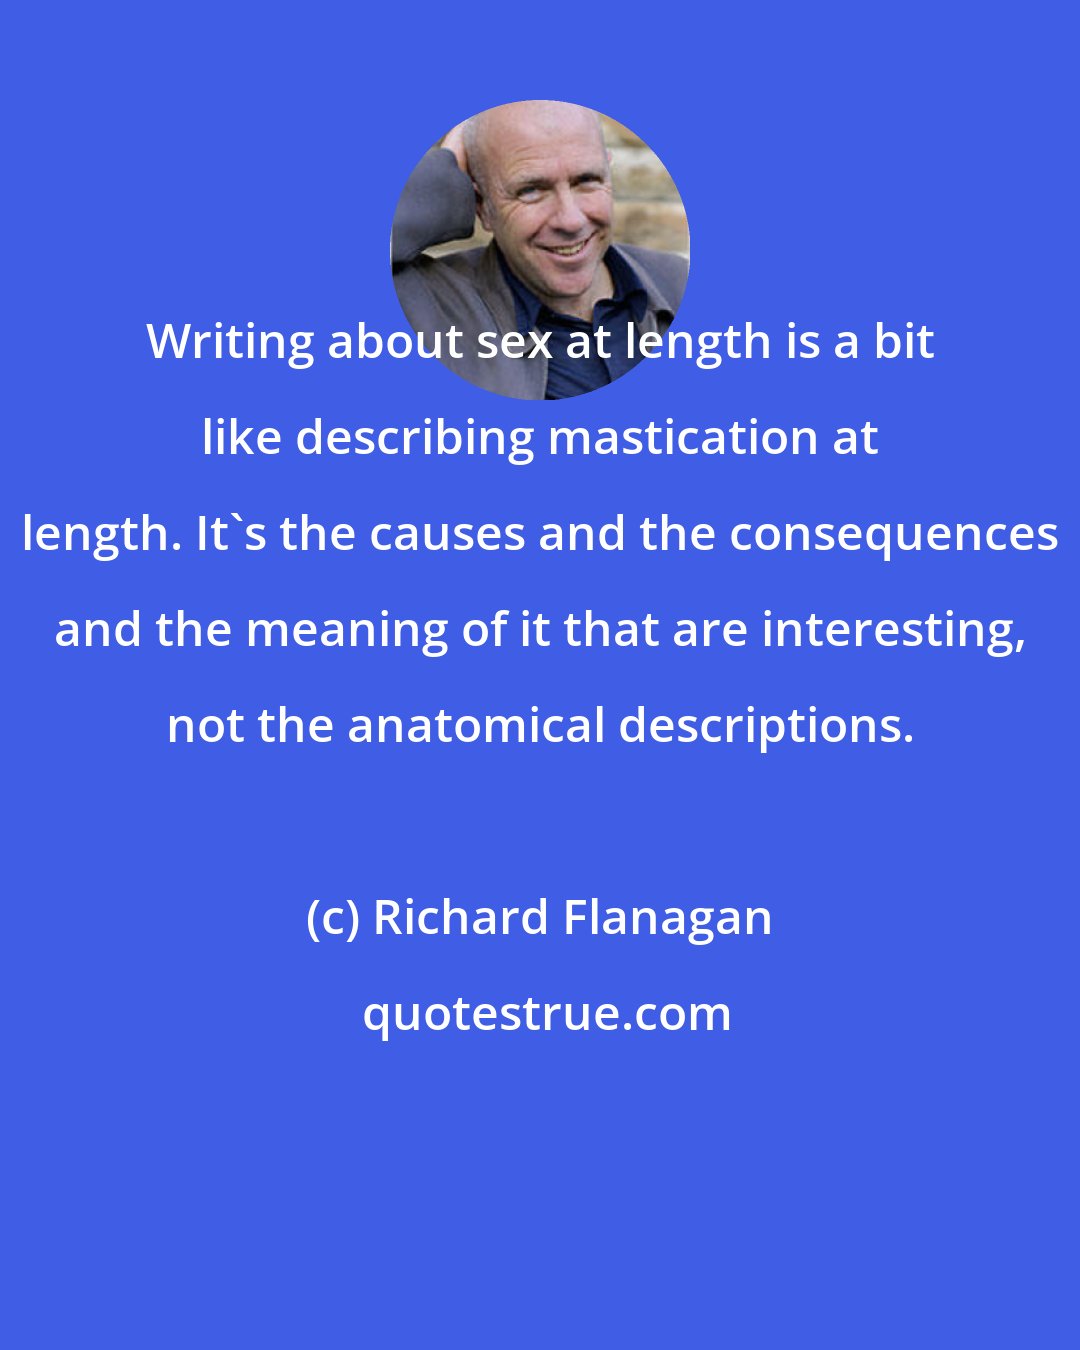 Richard Flanagan: Writing about sex at length is a bit like describing mastication at length. It's the causes and the consequences and the meaning of it that are interesting, not the anatomical descriptions.